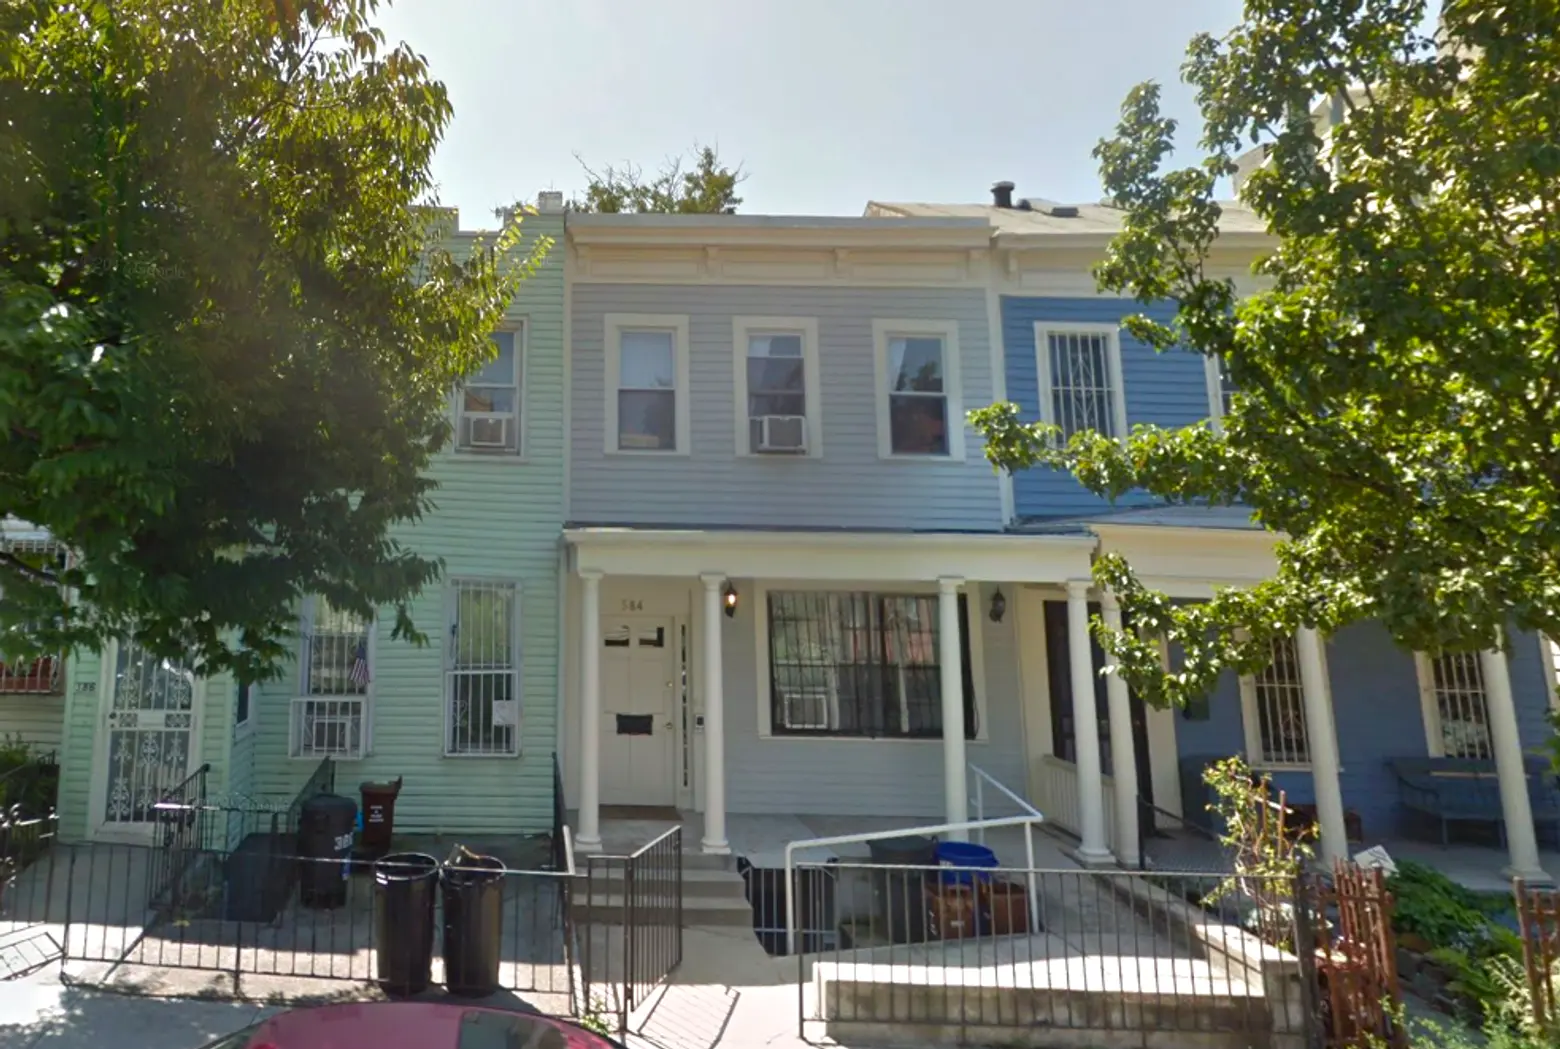 De Blasio secured mortgages for his Park Slope homes from bank tied to dubious deal with city